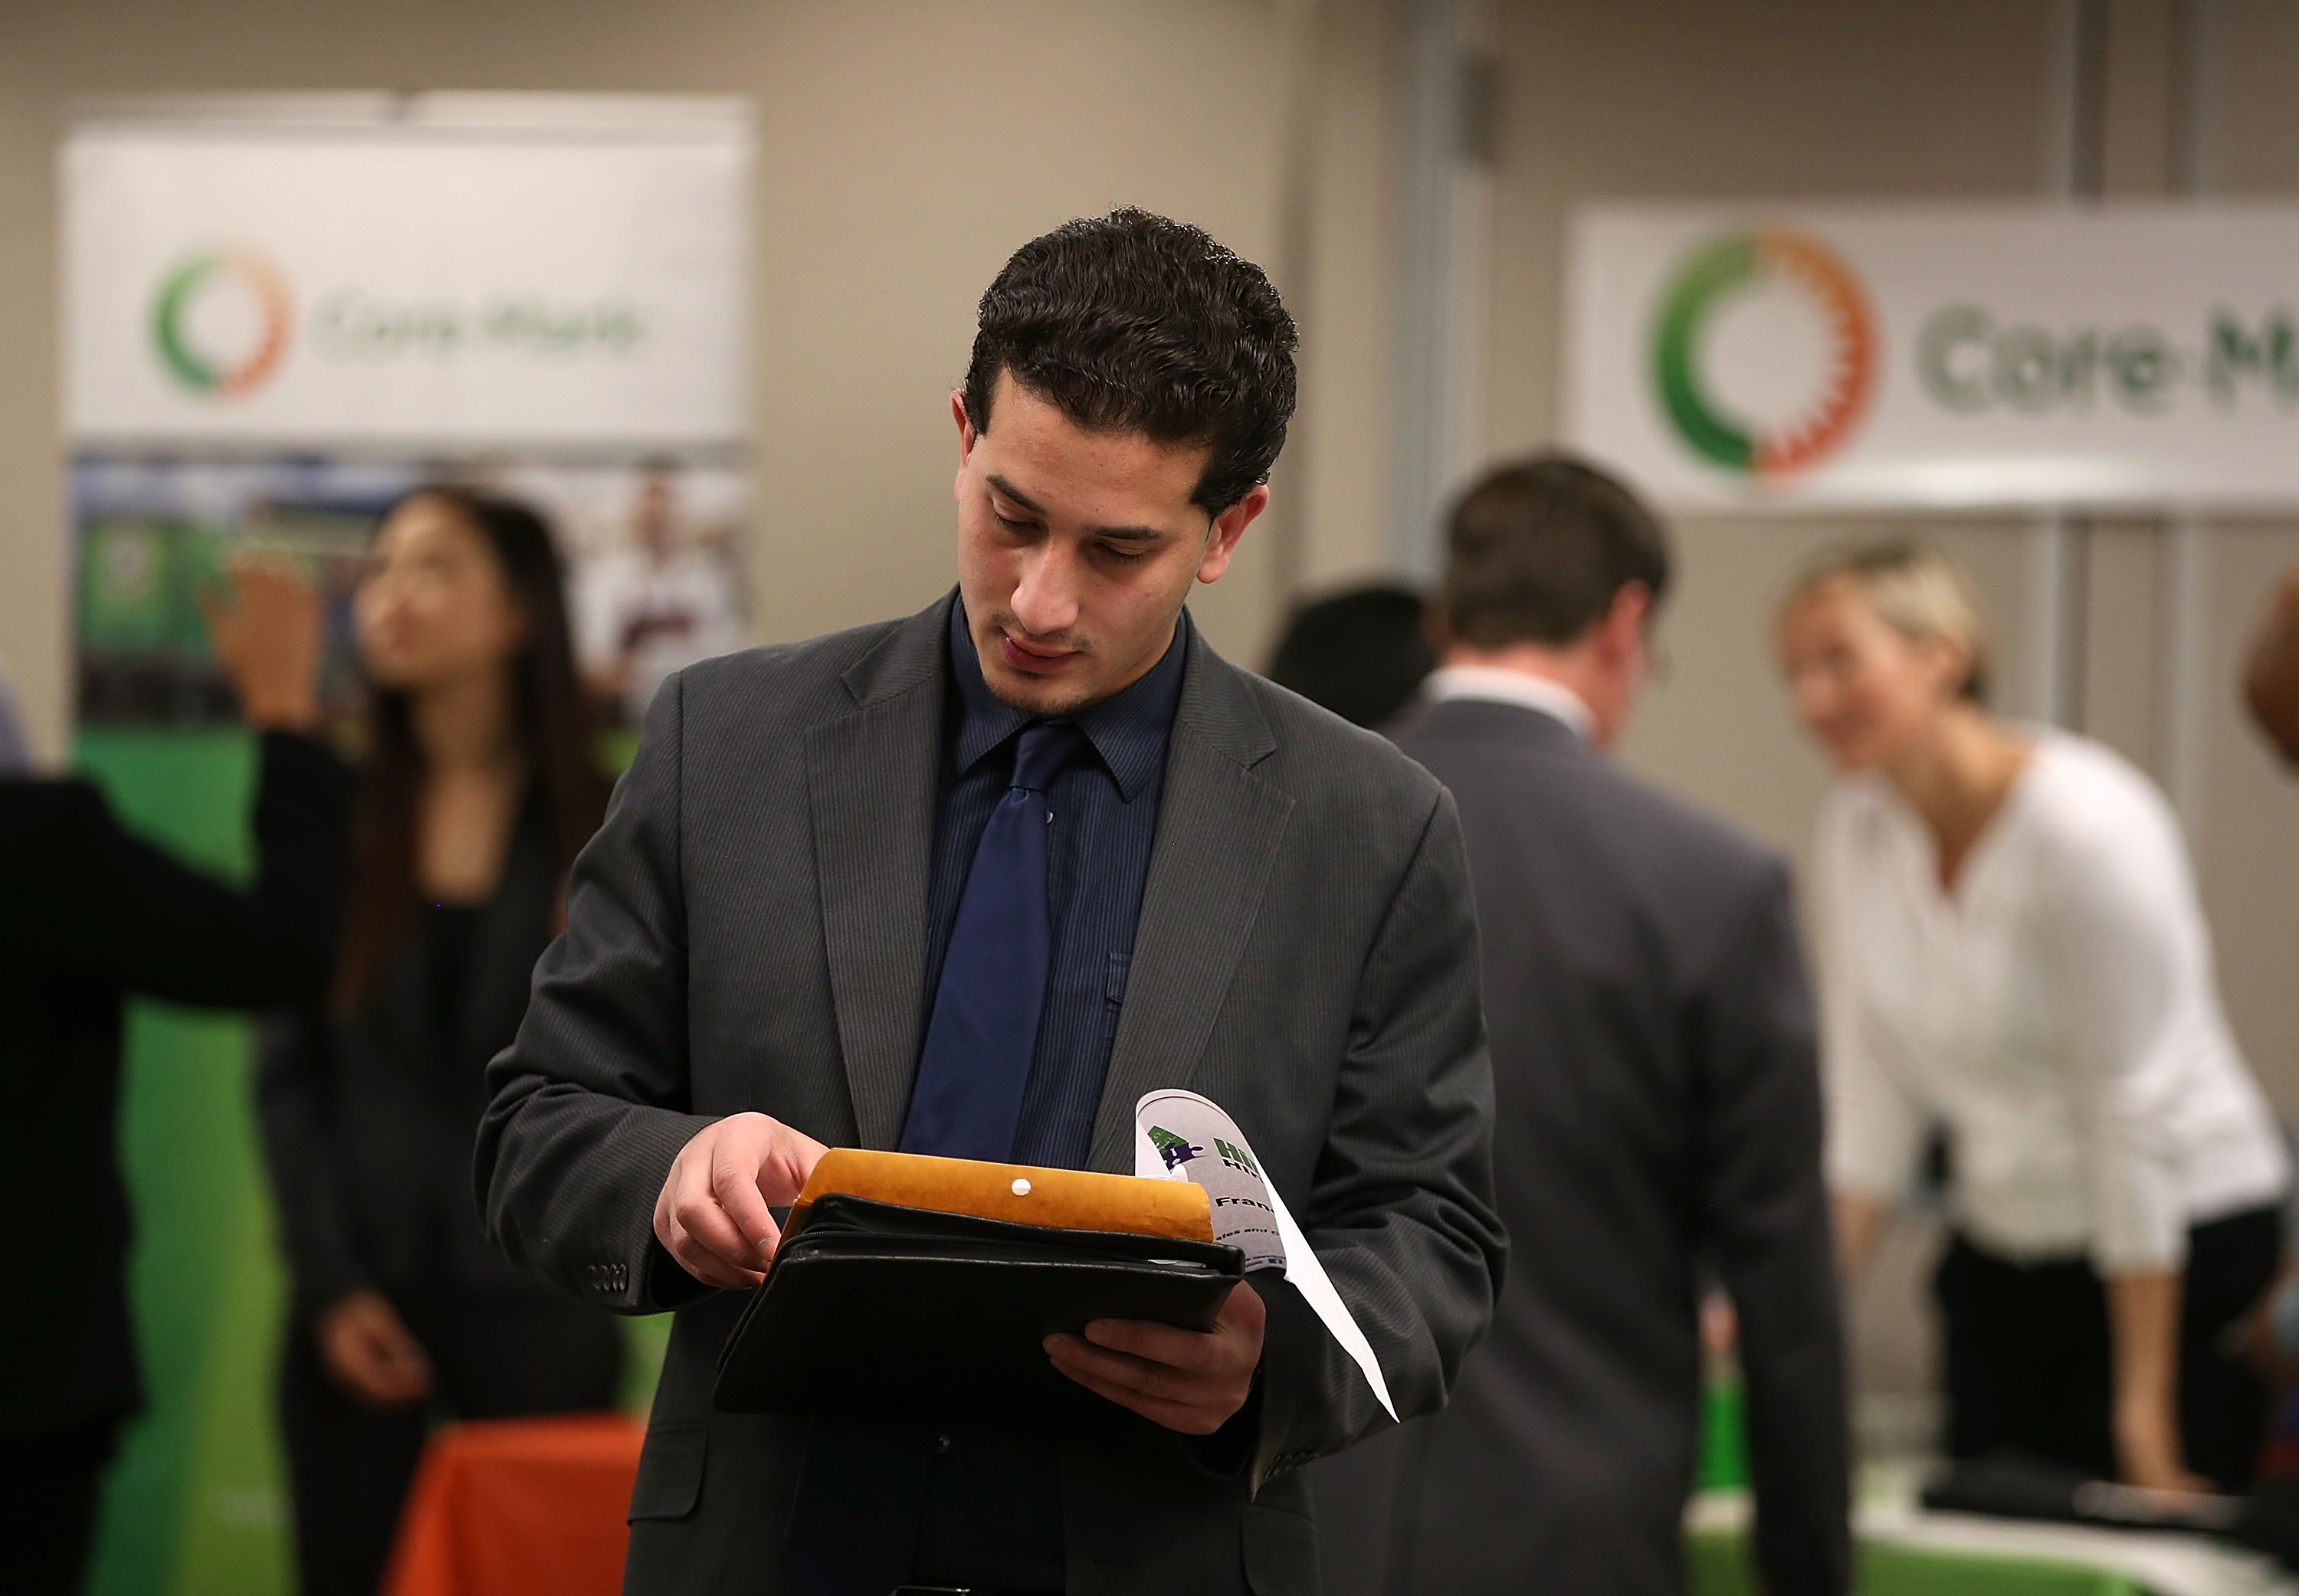 A young man looks at papers in his hand while he walks through a job fair